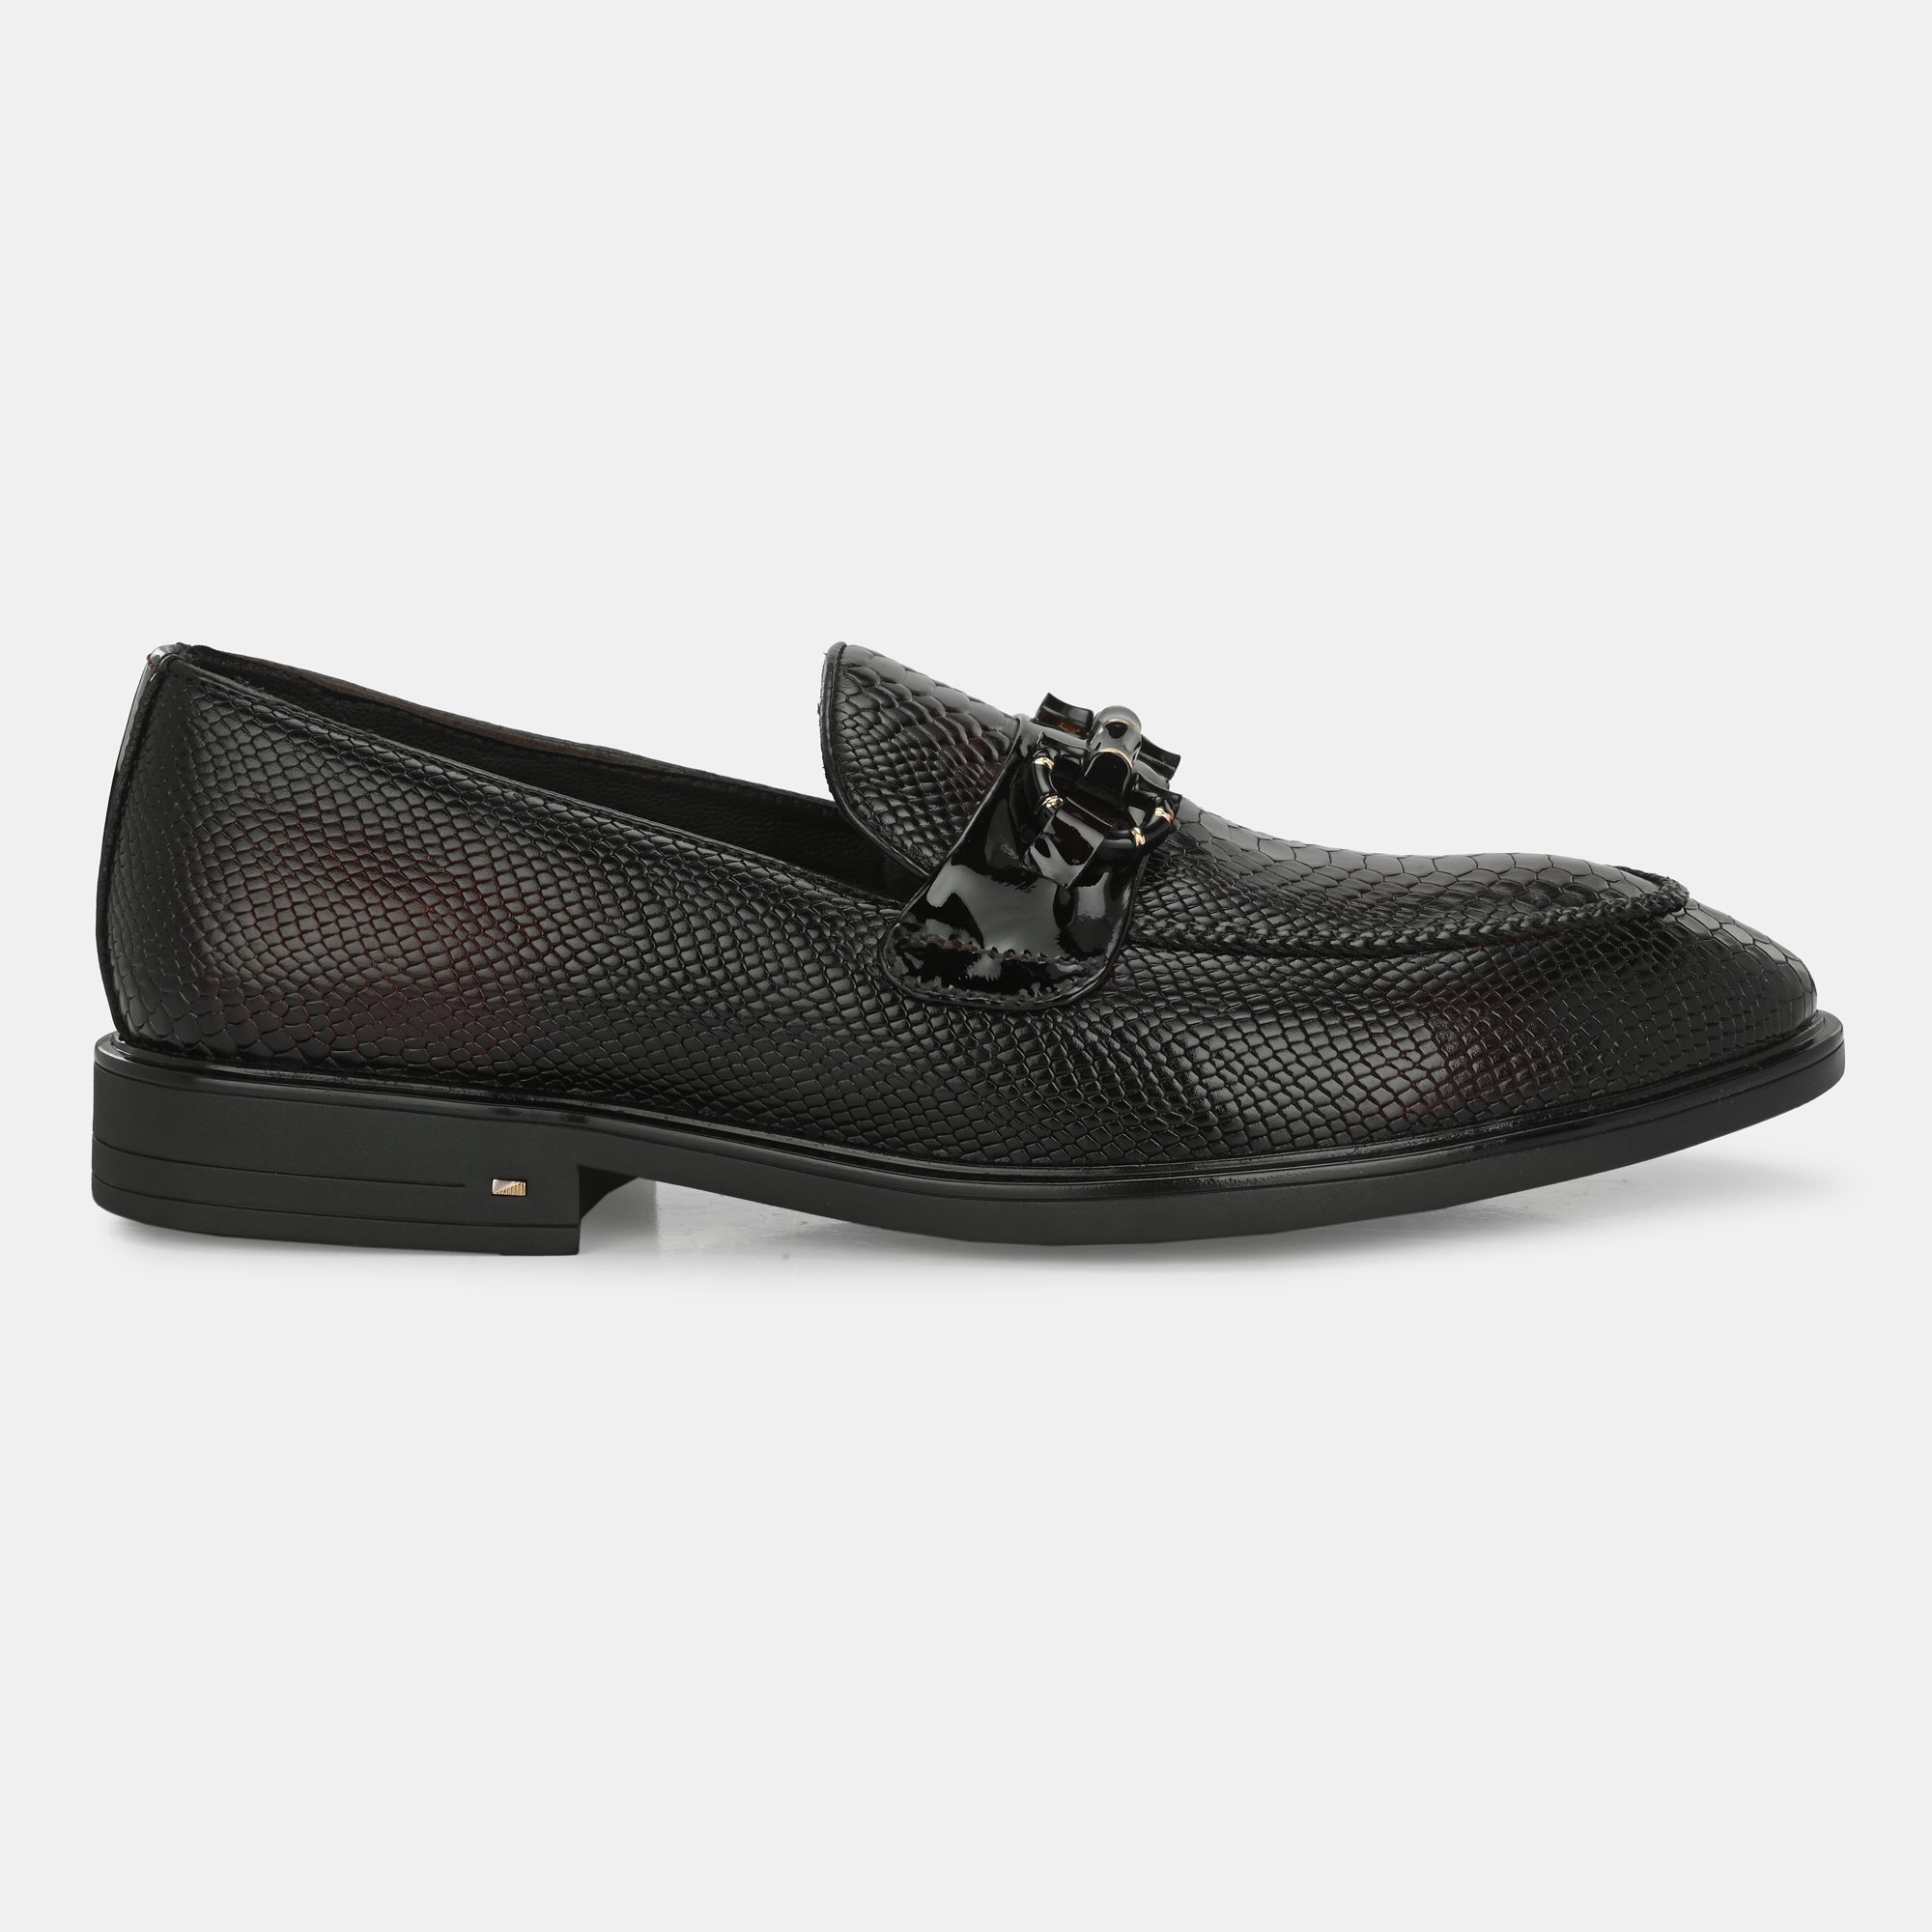 Cherry Textured Buckled Loafers by Lafattio